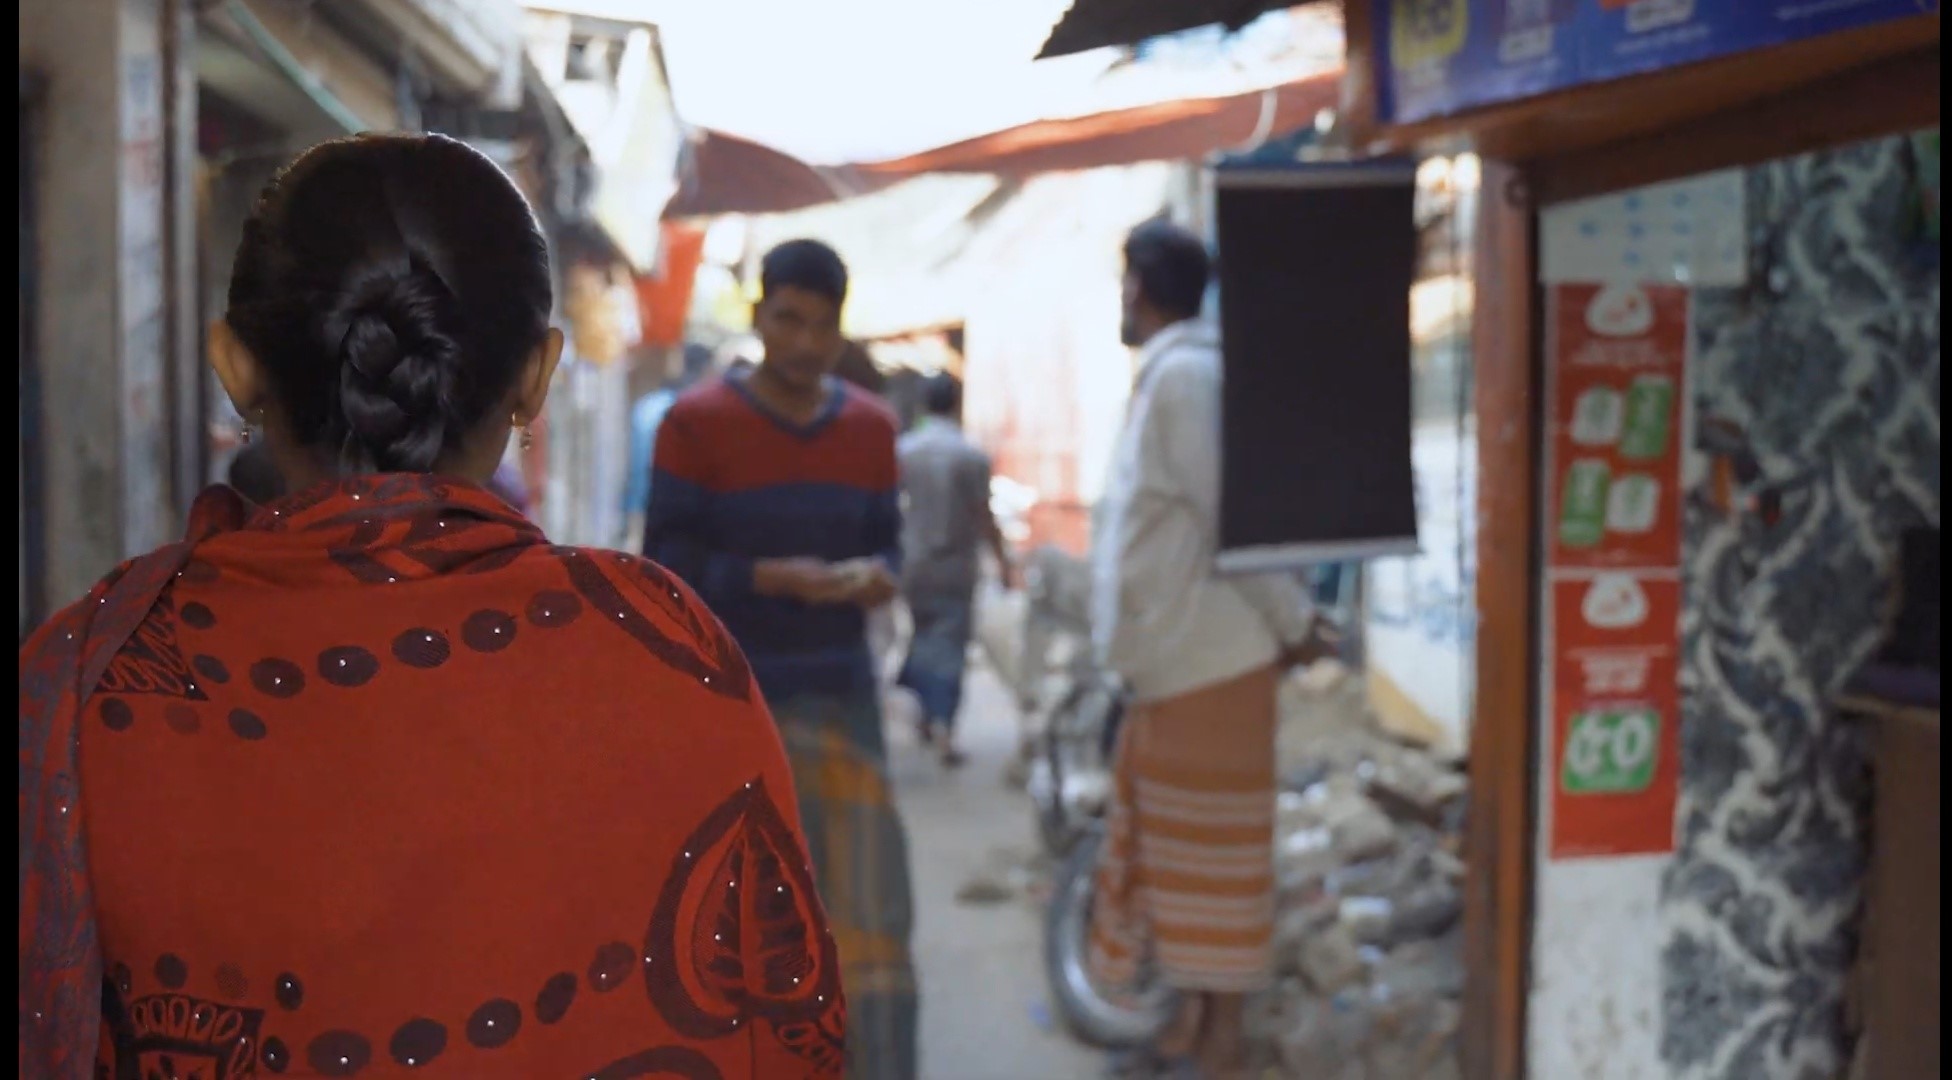 A woman in an orange top with dark, long hair which is tied back is seen from behind. She is in the foreground and in the background you can see she is walking down a narrow alley in an informal settlement. She is walking towards shops and three men in the distance who are walking around.